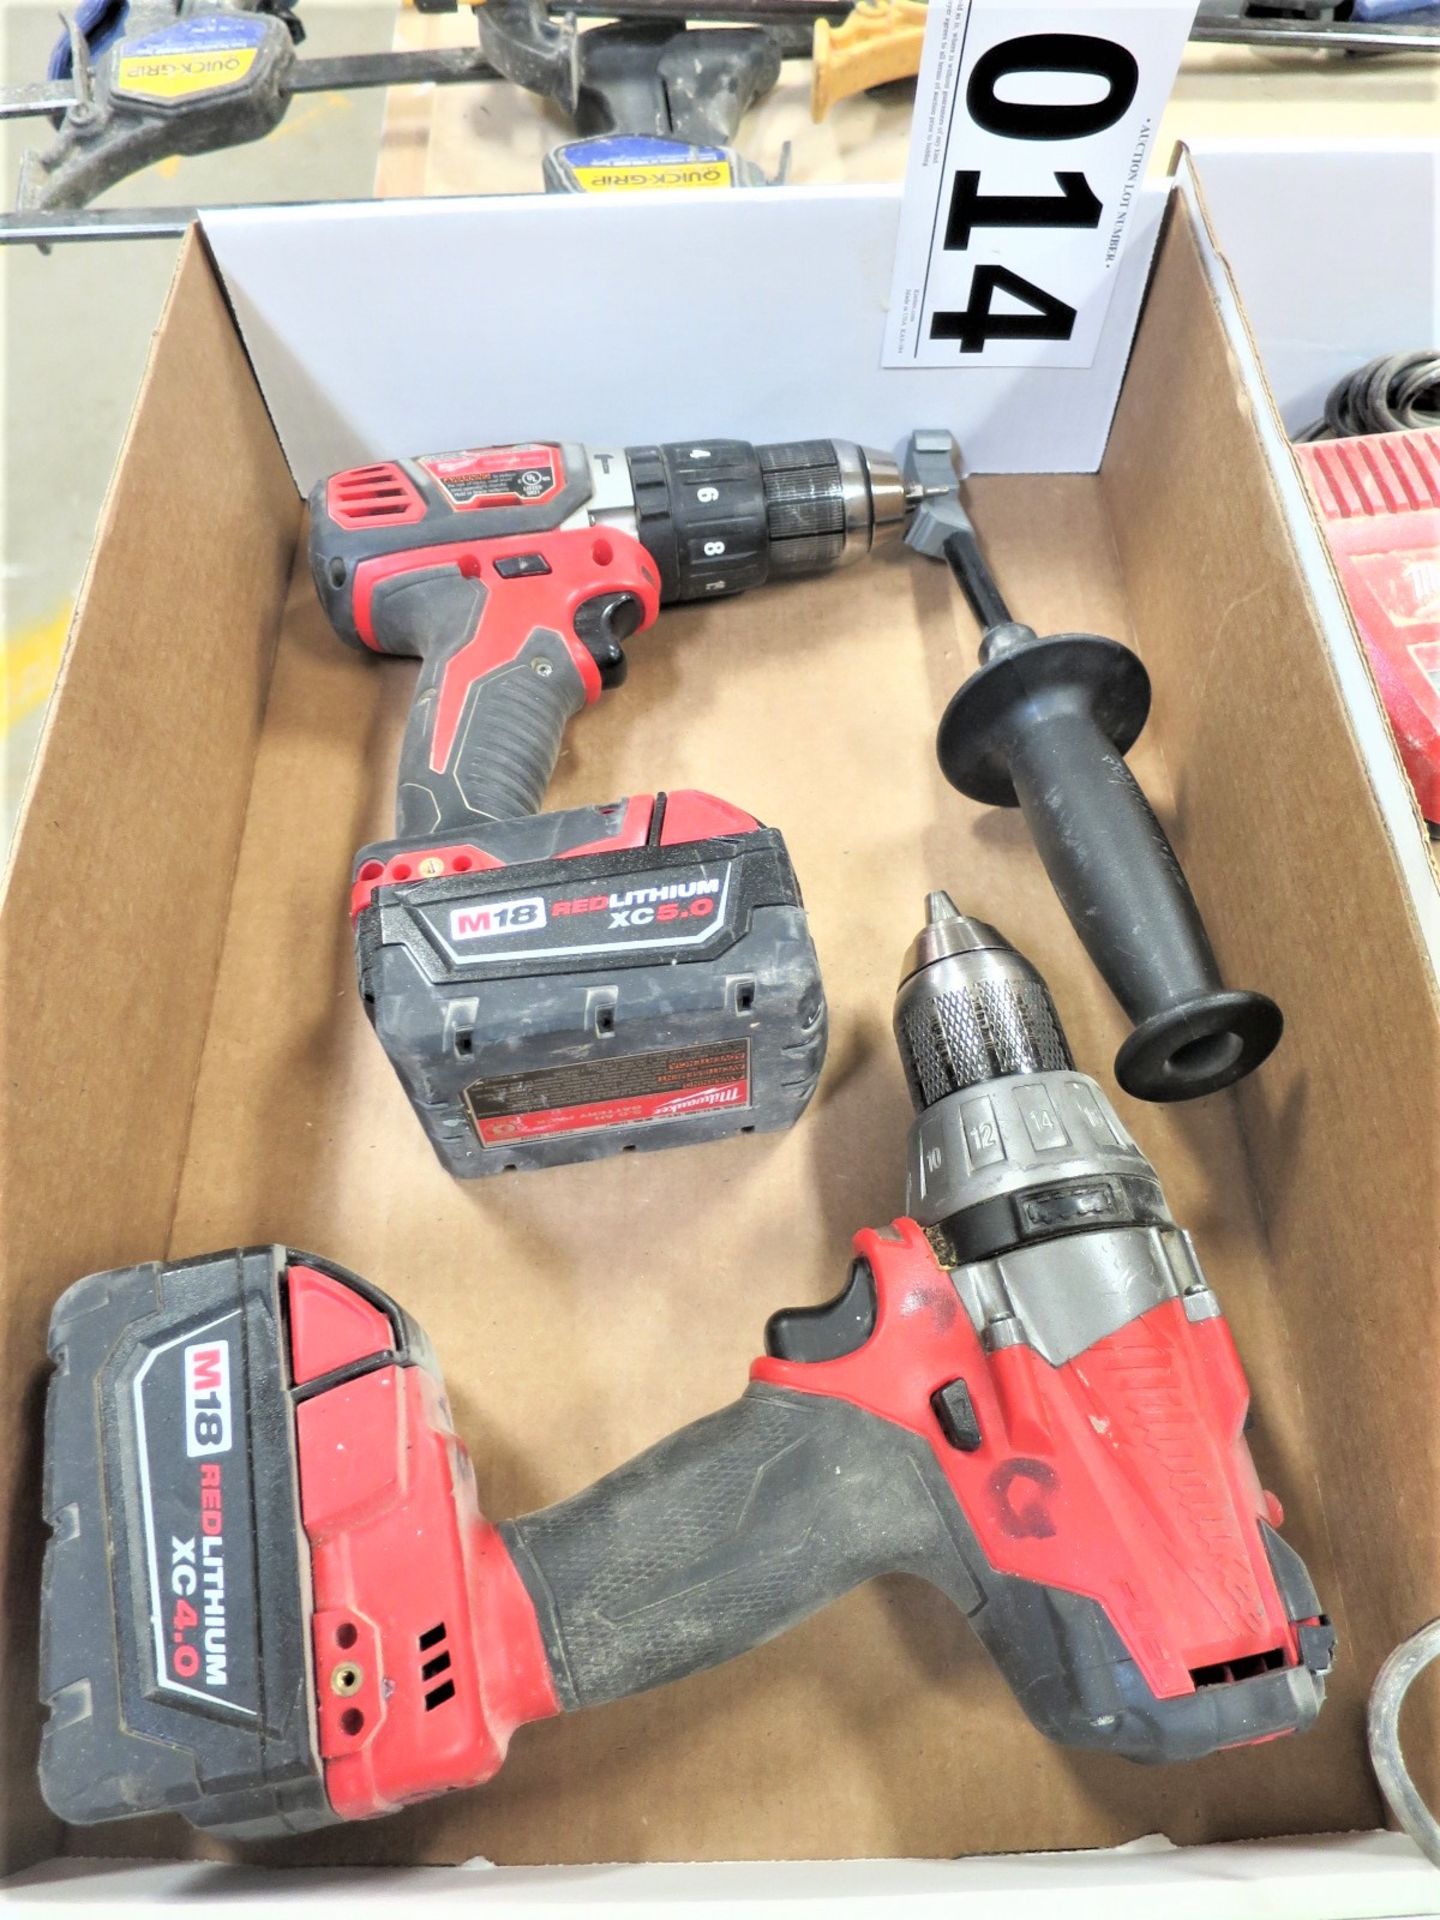 Milwaukee 1/2" Hammer Drill and 1/2" Drill